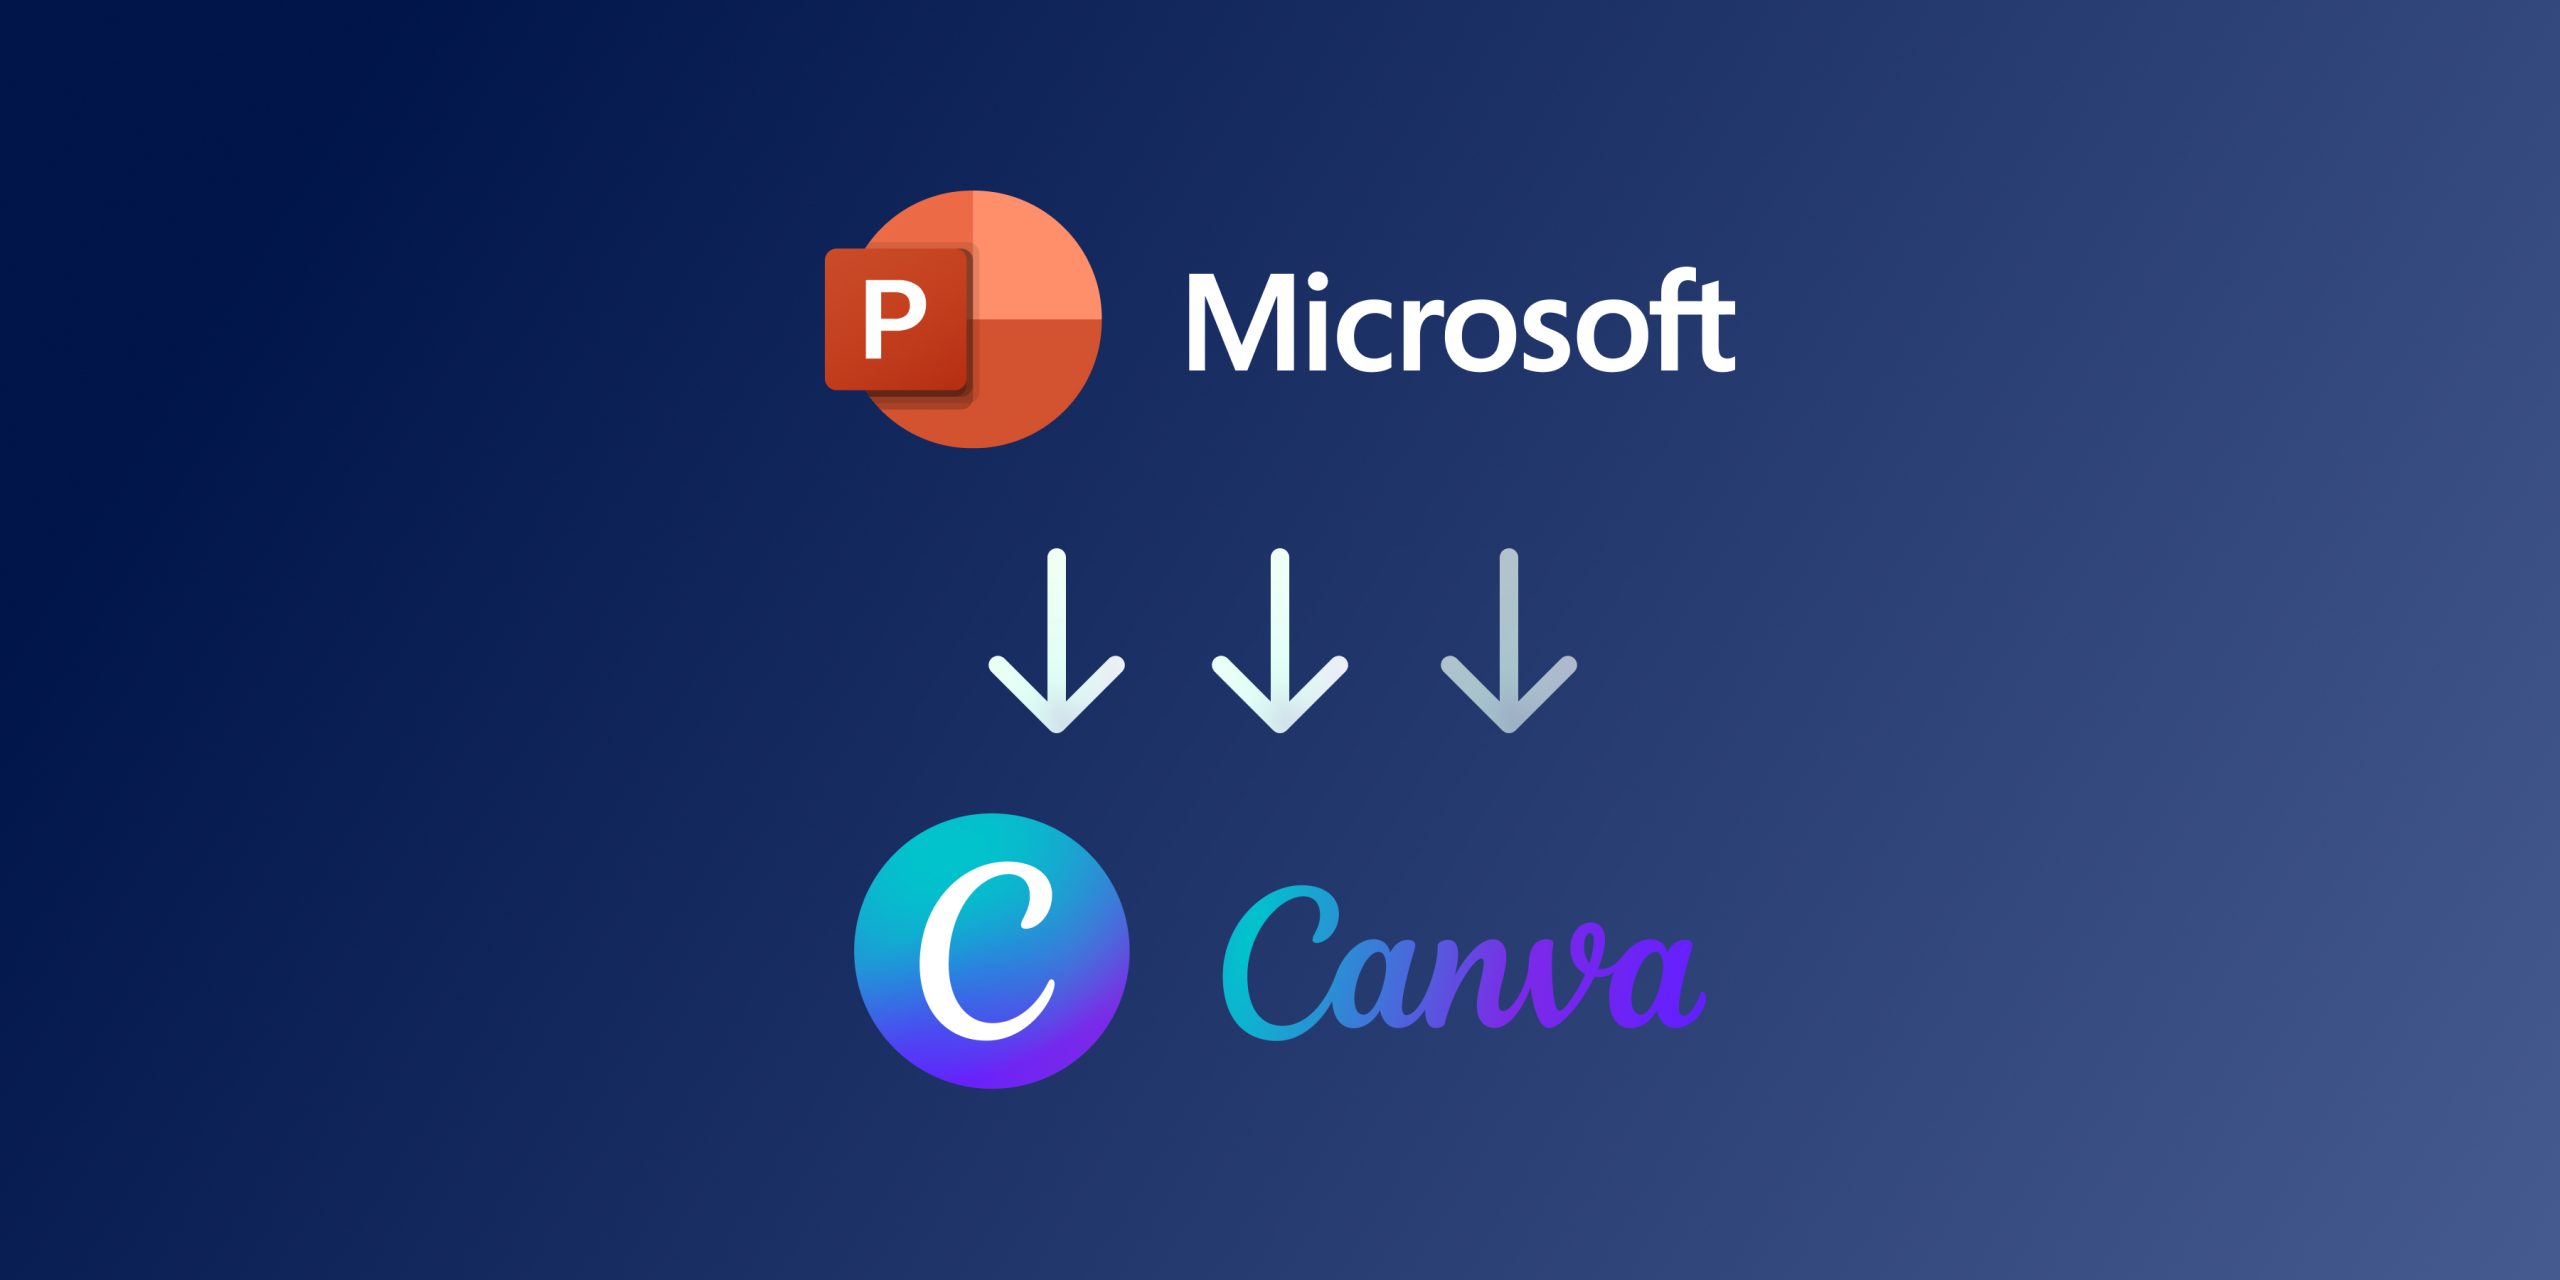 How to Convert PowerPoint to Canva in Under 2 Minutes